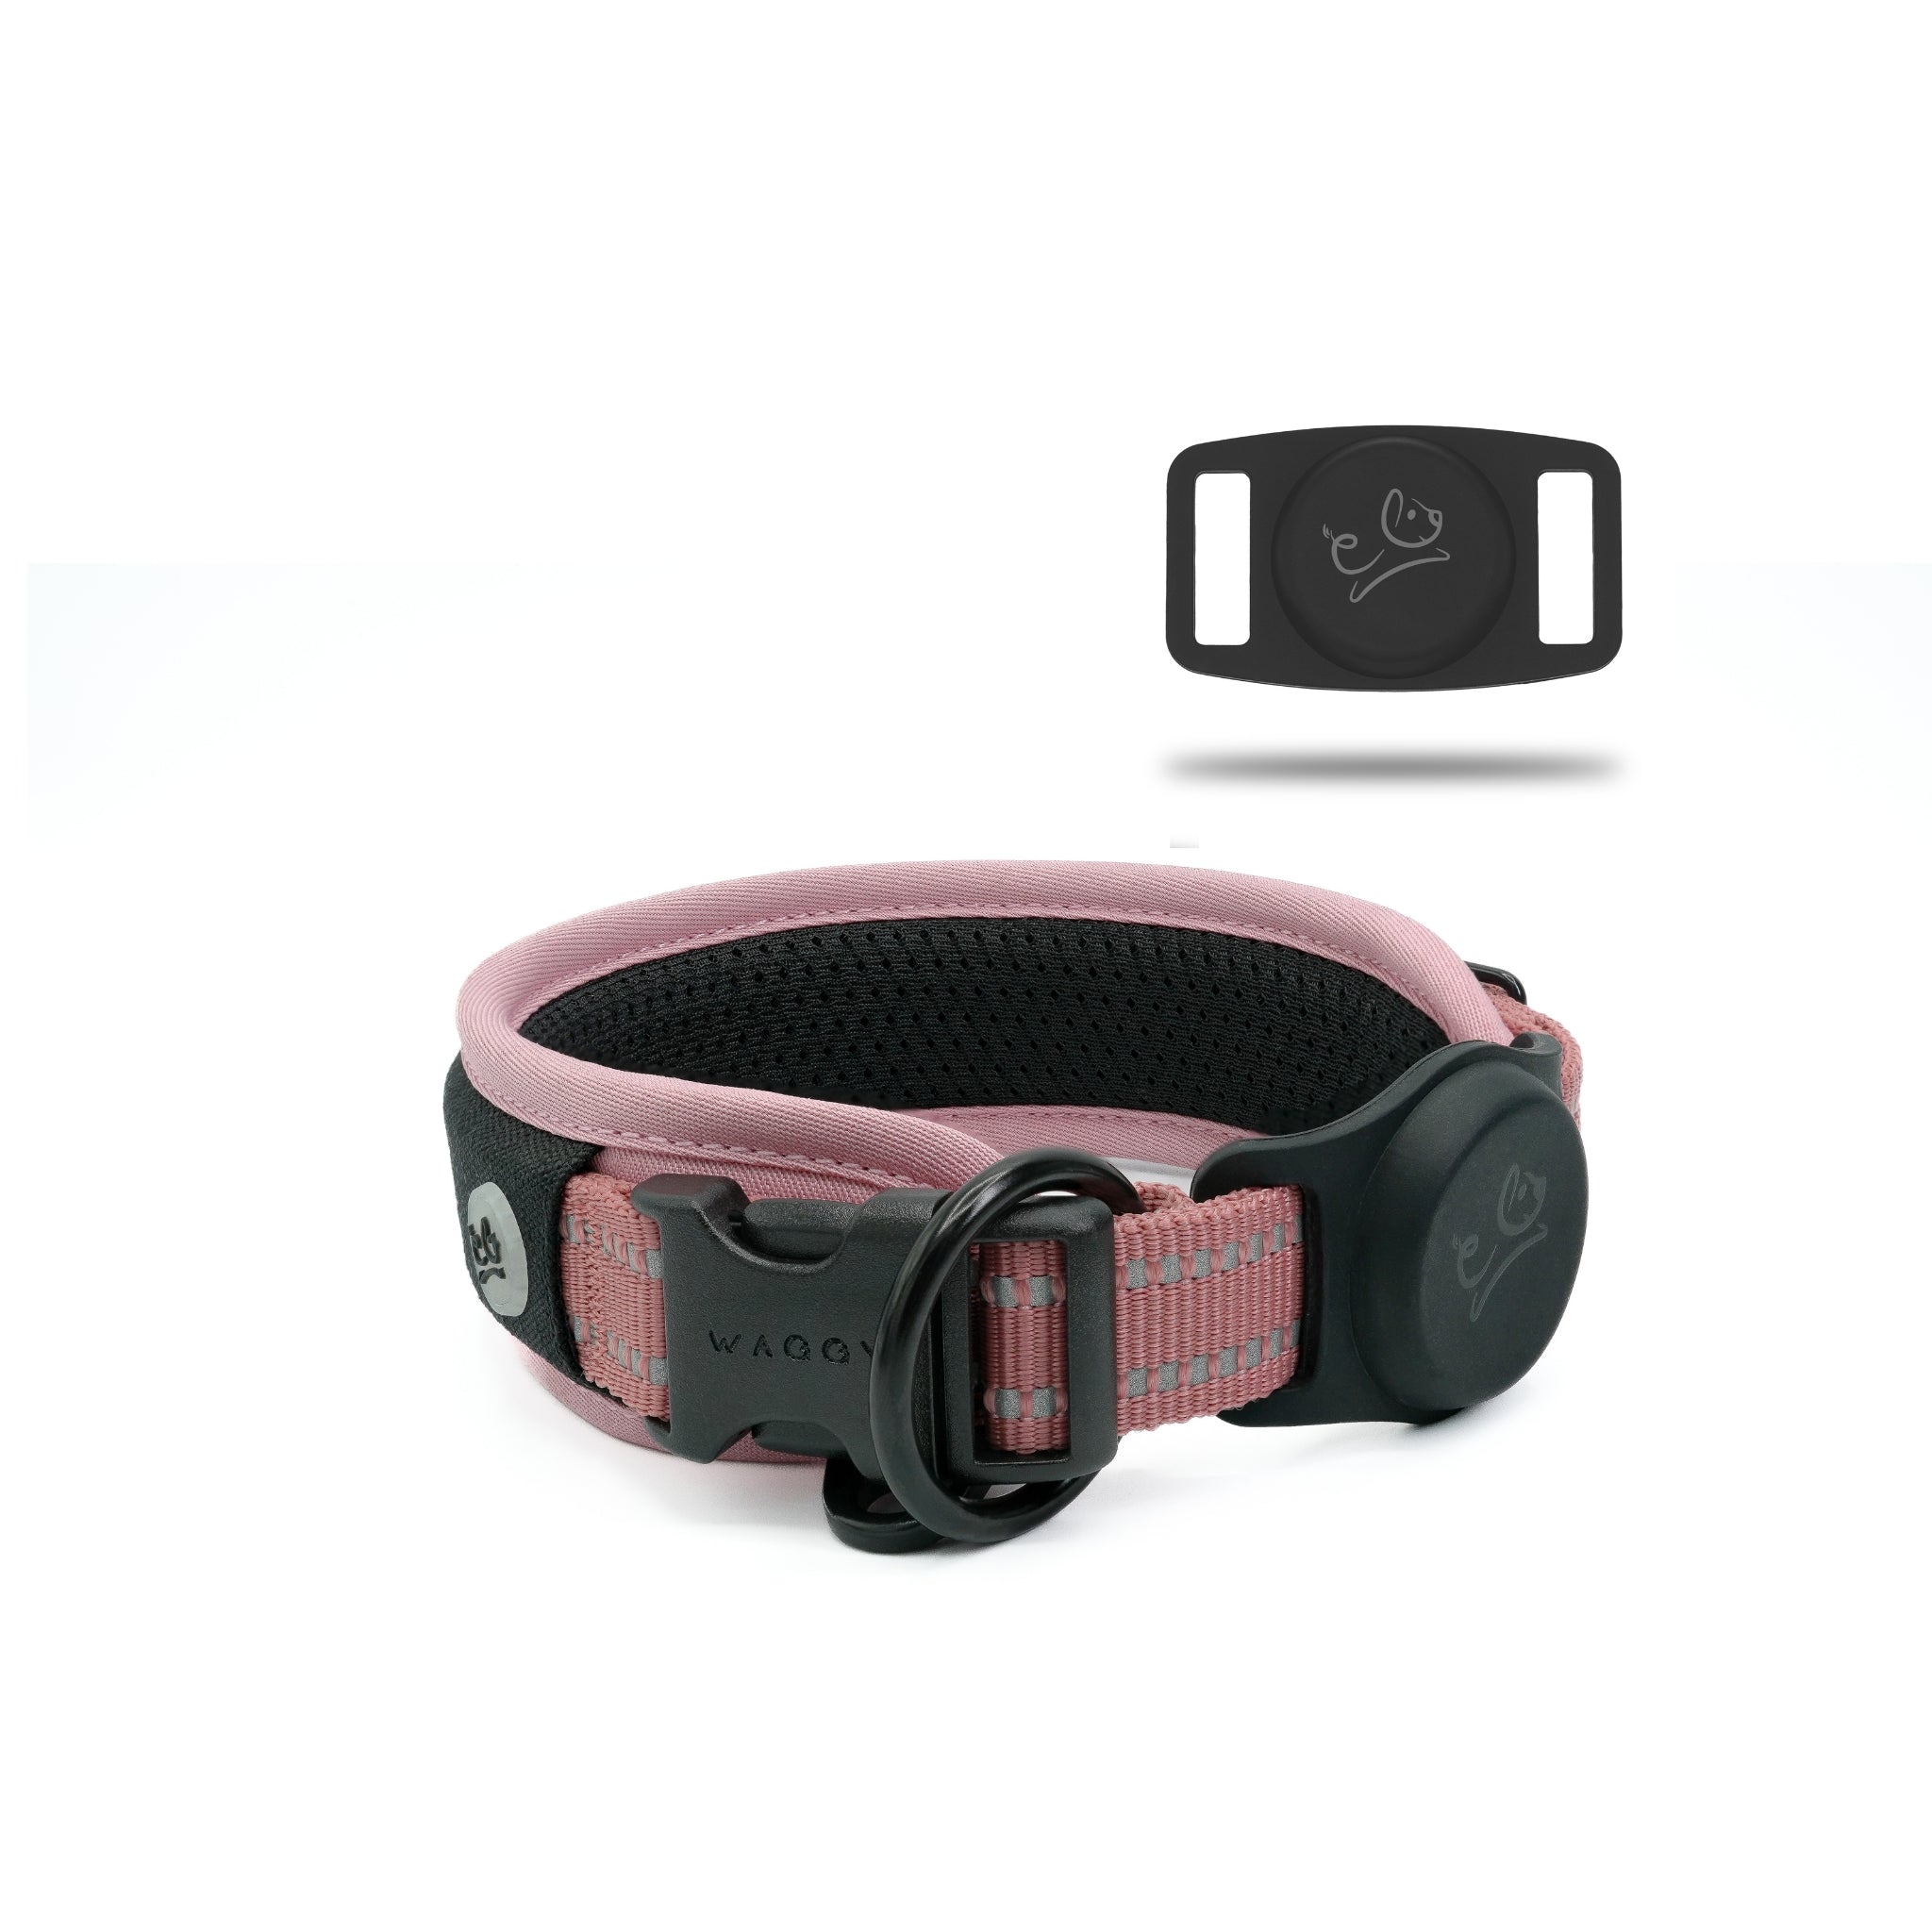 Pink Air Mesh dog collar in the center showing details of the 3M reflective stitching &amp; airtag holder attached to the collar. Airtag holder on the right corner with Waggy logo.